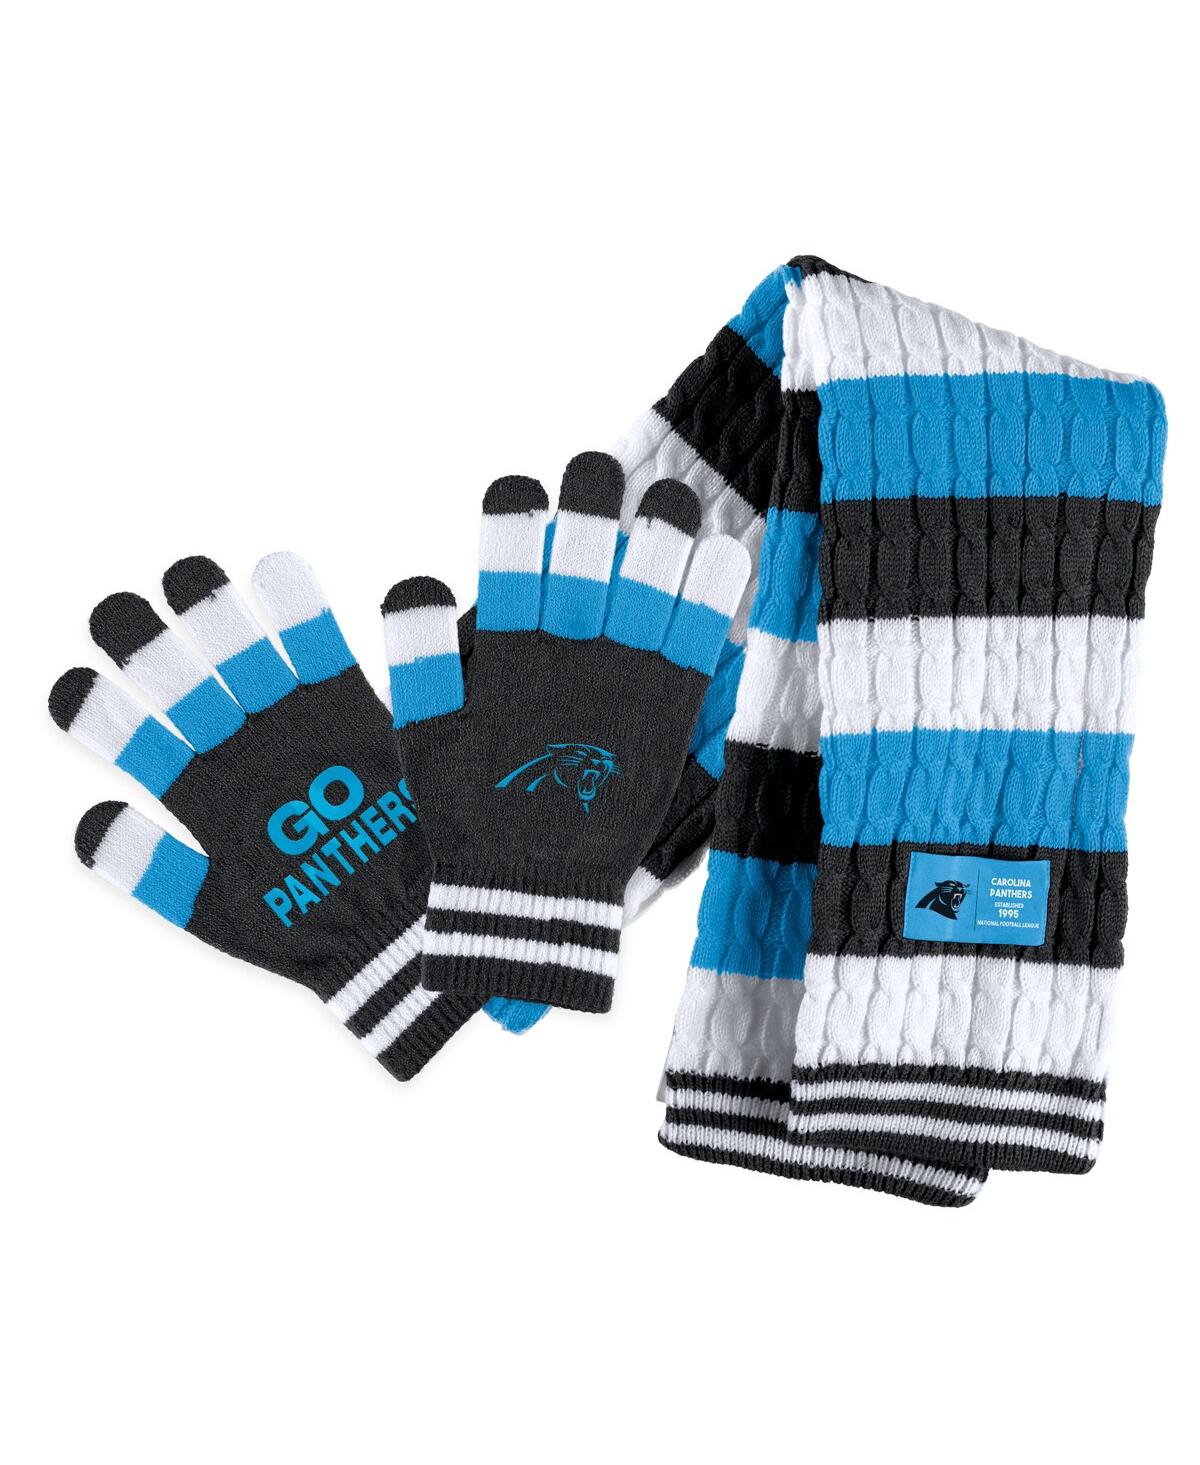 Women's Wear by Erin Andrews Carolina Panthers Striped Scarf and Gloves Set - Multi